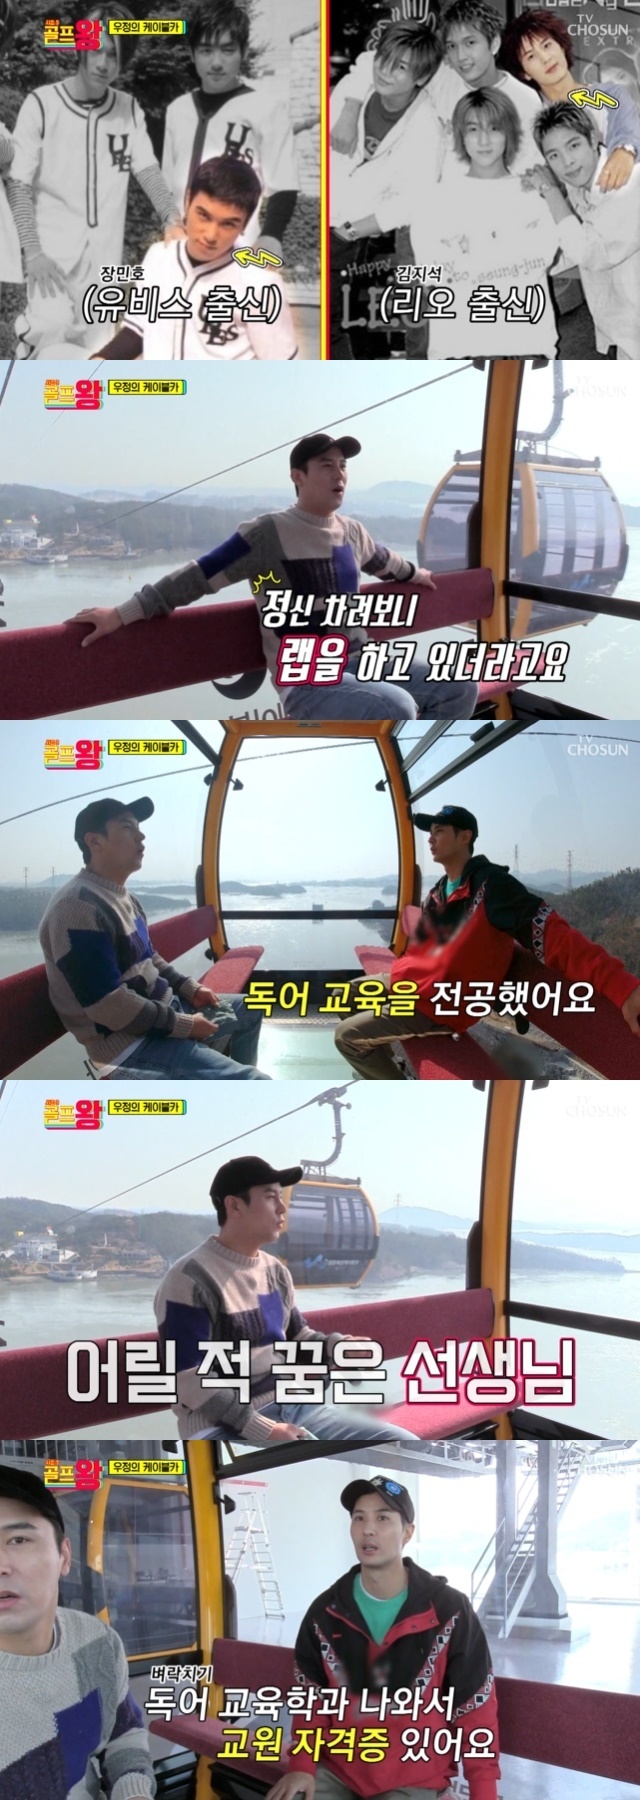 Kim Ji-Seok has unveiled a special holding licence.On April 23, TV Chosun entertainment Golf King 3 3 times, the members had time to get to know each other more.On this day, Kim Ji-seok and Jang Min-Ho talked to each other in a cable car that could only be solved by solving problems with each other.Kim Ji-seok was fortunate at this time, I have something in common with my brother and me, I am from idol.In the past, Kim Ji-seok made his debut as a member of the group Rio, and Jang Min-Ho made his debut as a member of Ubis.Kim Ji-seok asked how he became an actor while playing idol. I was originally a dream, but I was cast to appear in a music video.So Jang Min-Ho also said, I did it too. I was originally a dream actor.I went to see Audition, and without knowing it, the Audition was the singer Audition. So I passed the first Audition as a singer.It was not bad to make a debut soon, so the start was done. 